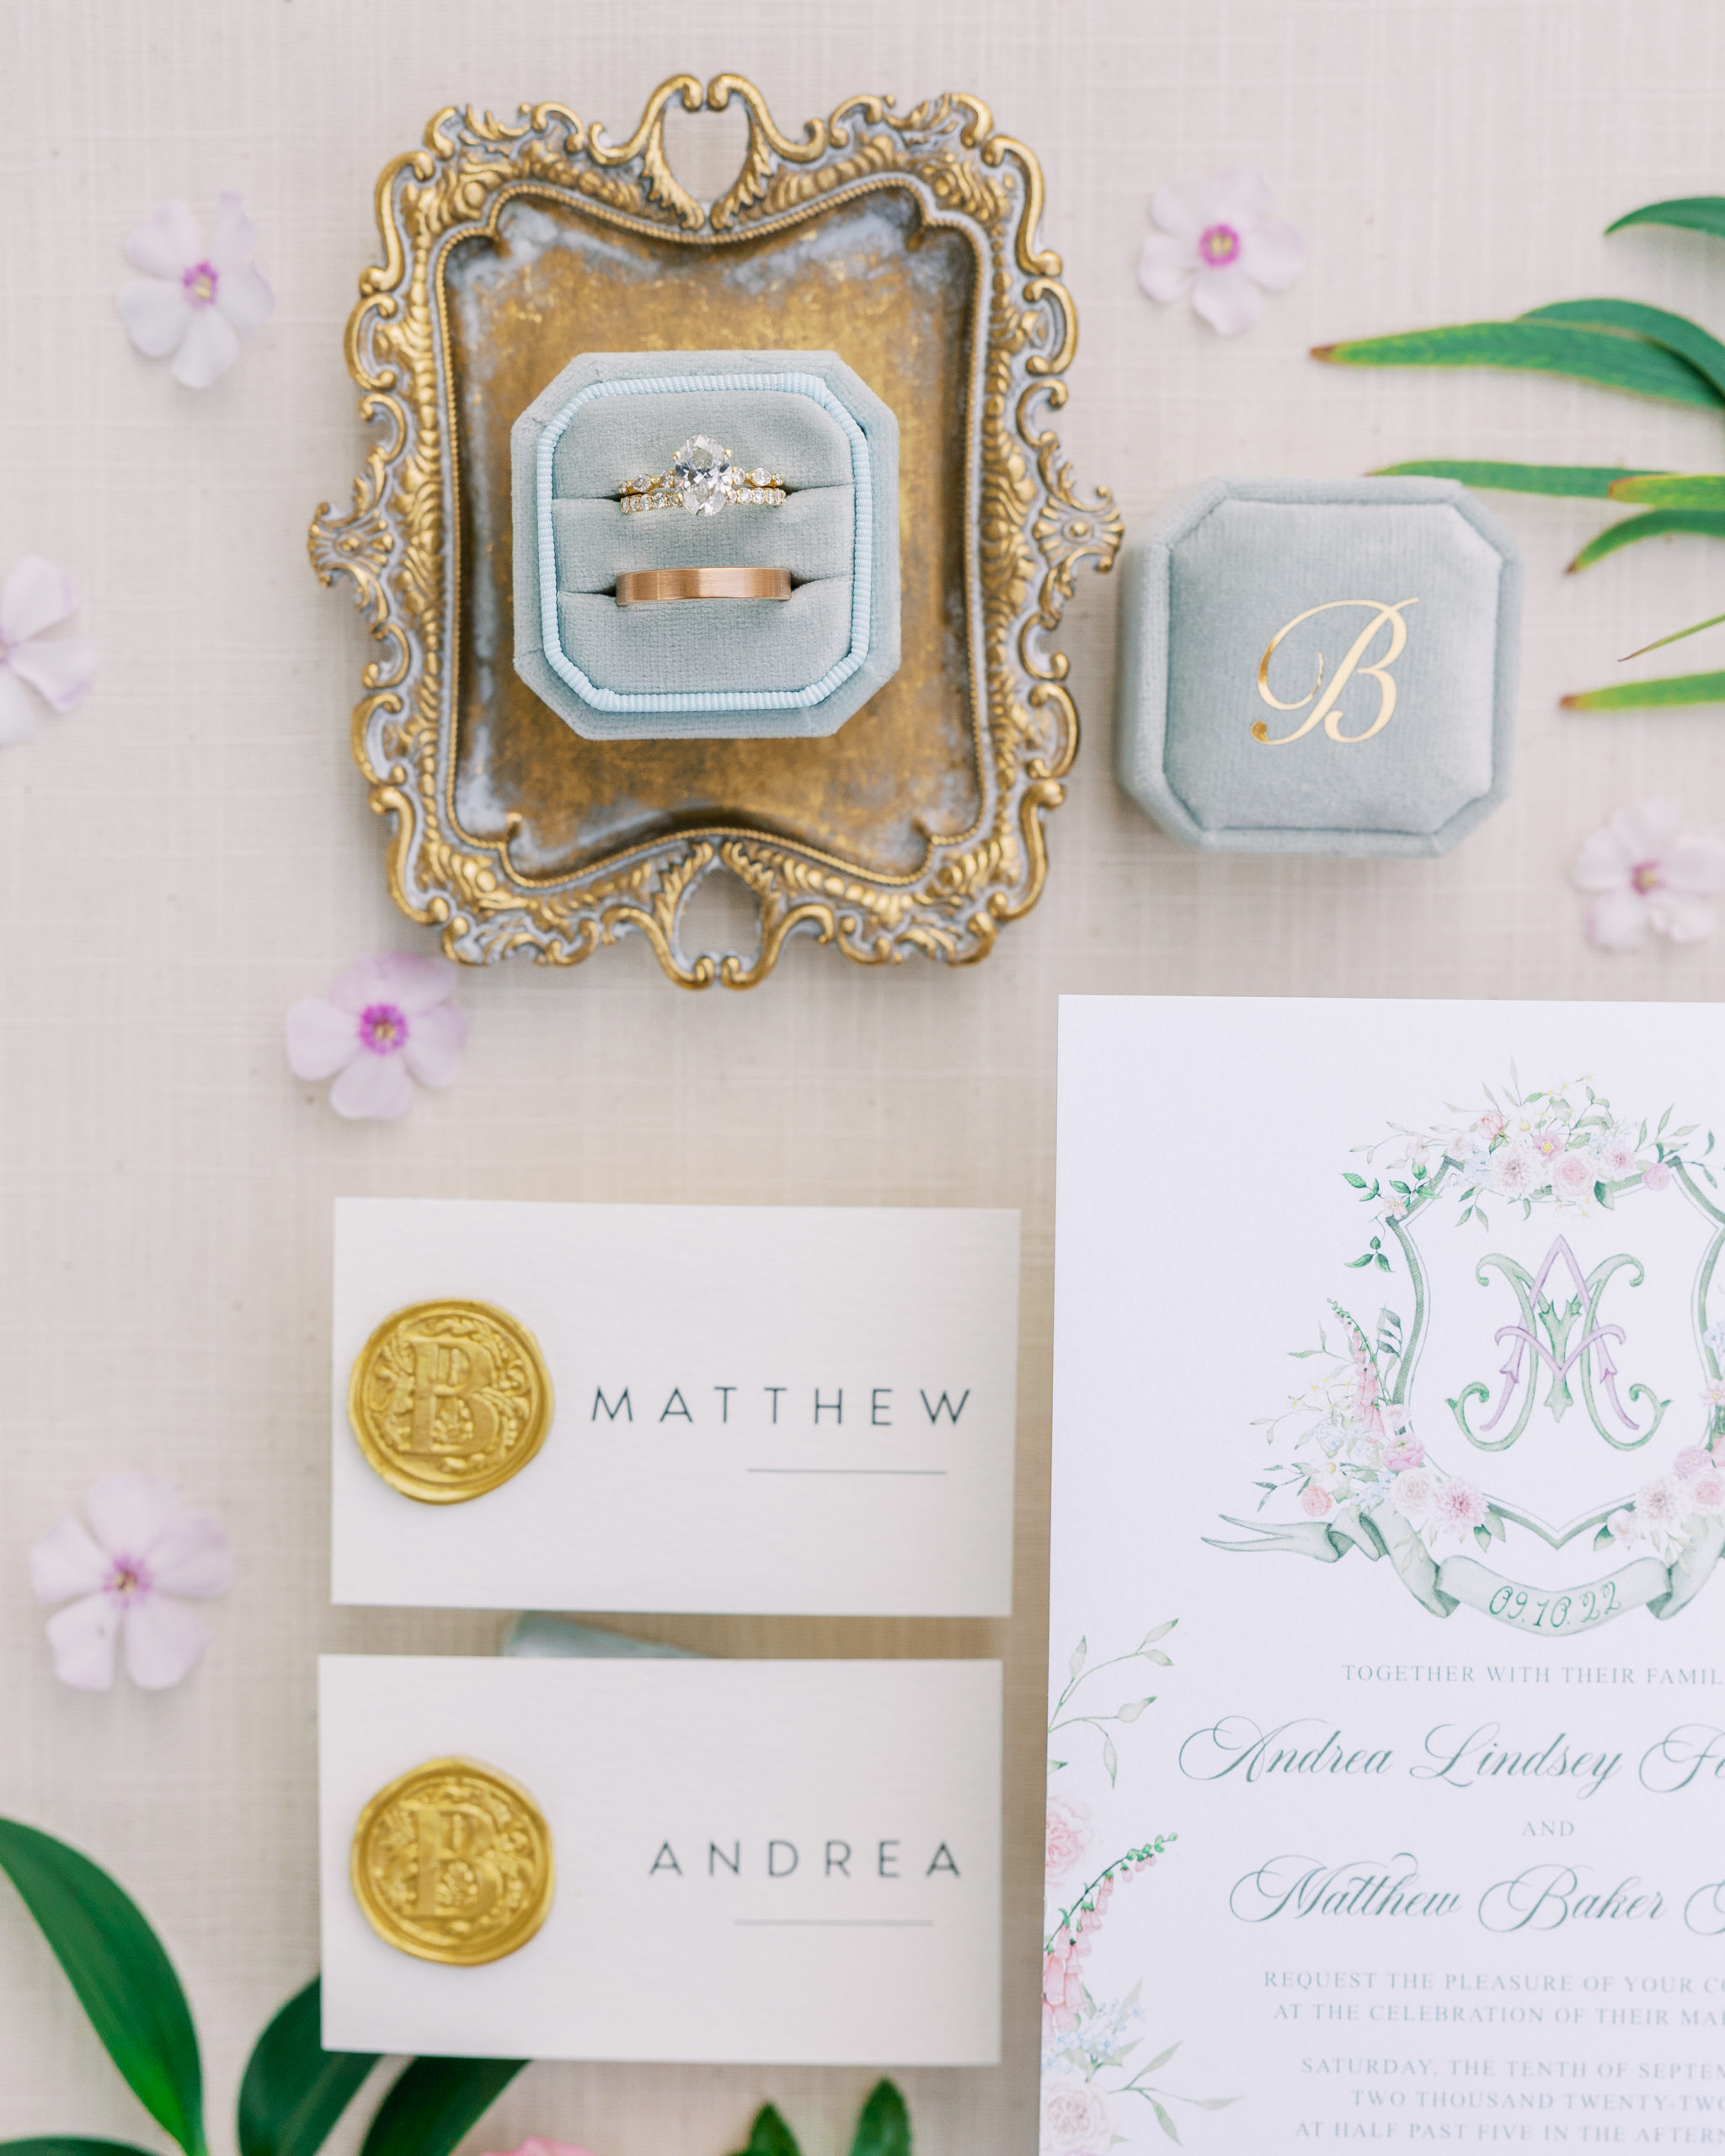 Wedding rings on small gold tray, blu ring box, name tags with wax seal and invitation for New Hampshire Wedding Photography